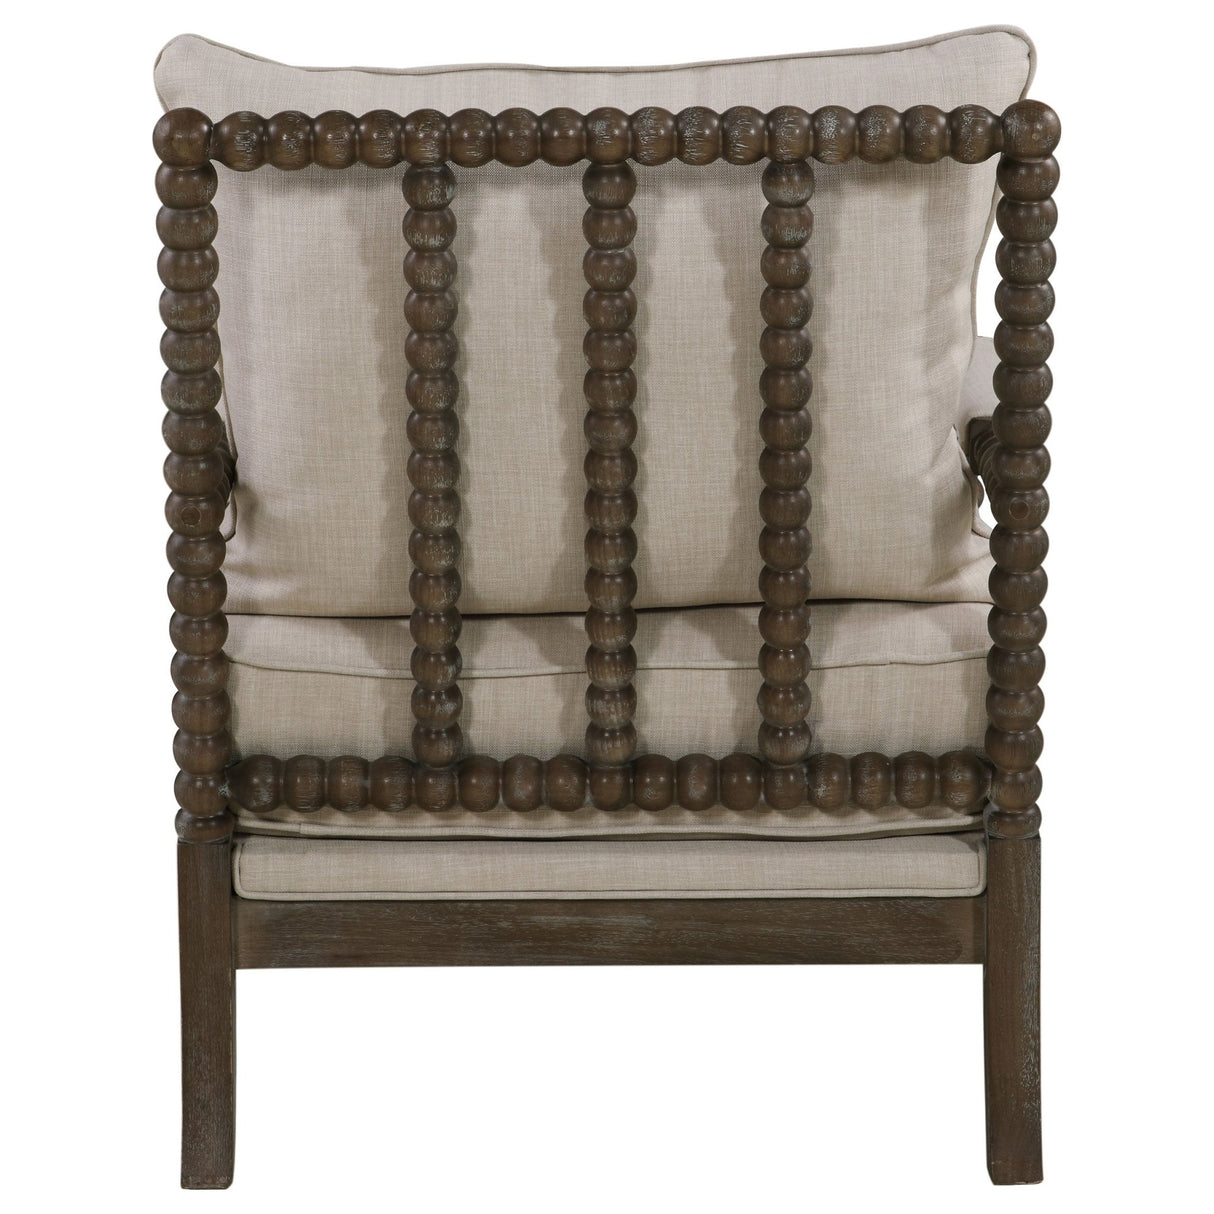 Accent Chair - Blanchett Cushion Back Accent Chair Beige and Natural - Accent Chairs - 905362 - image - 7